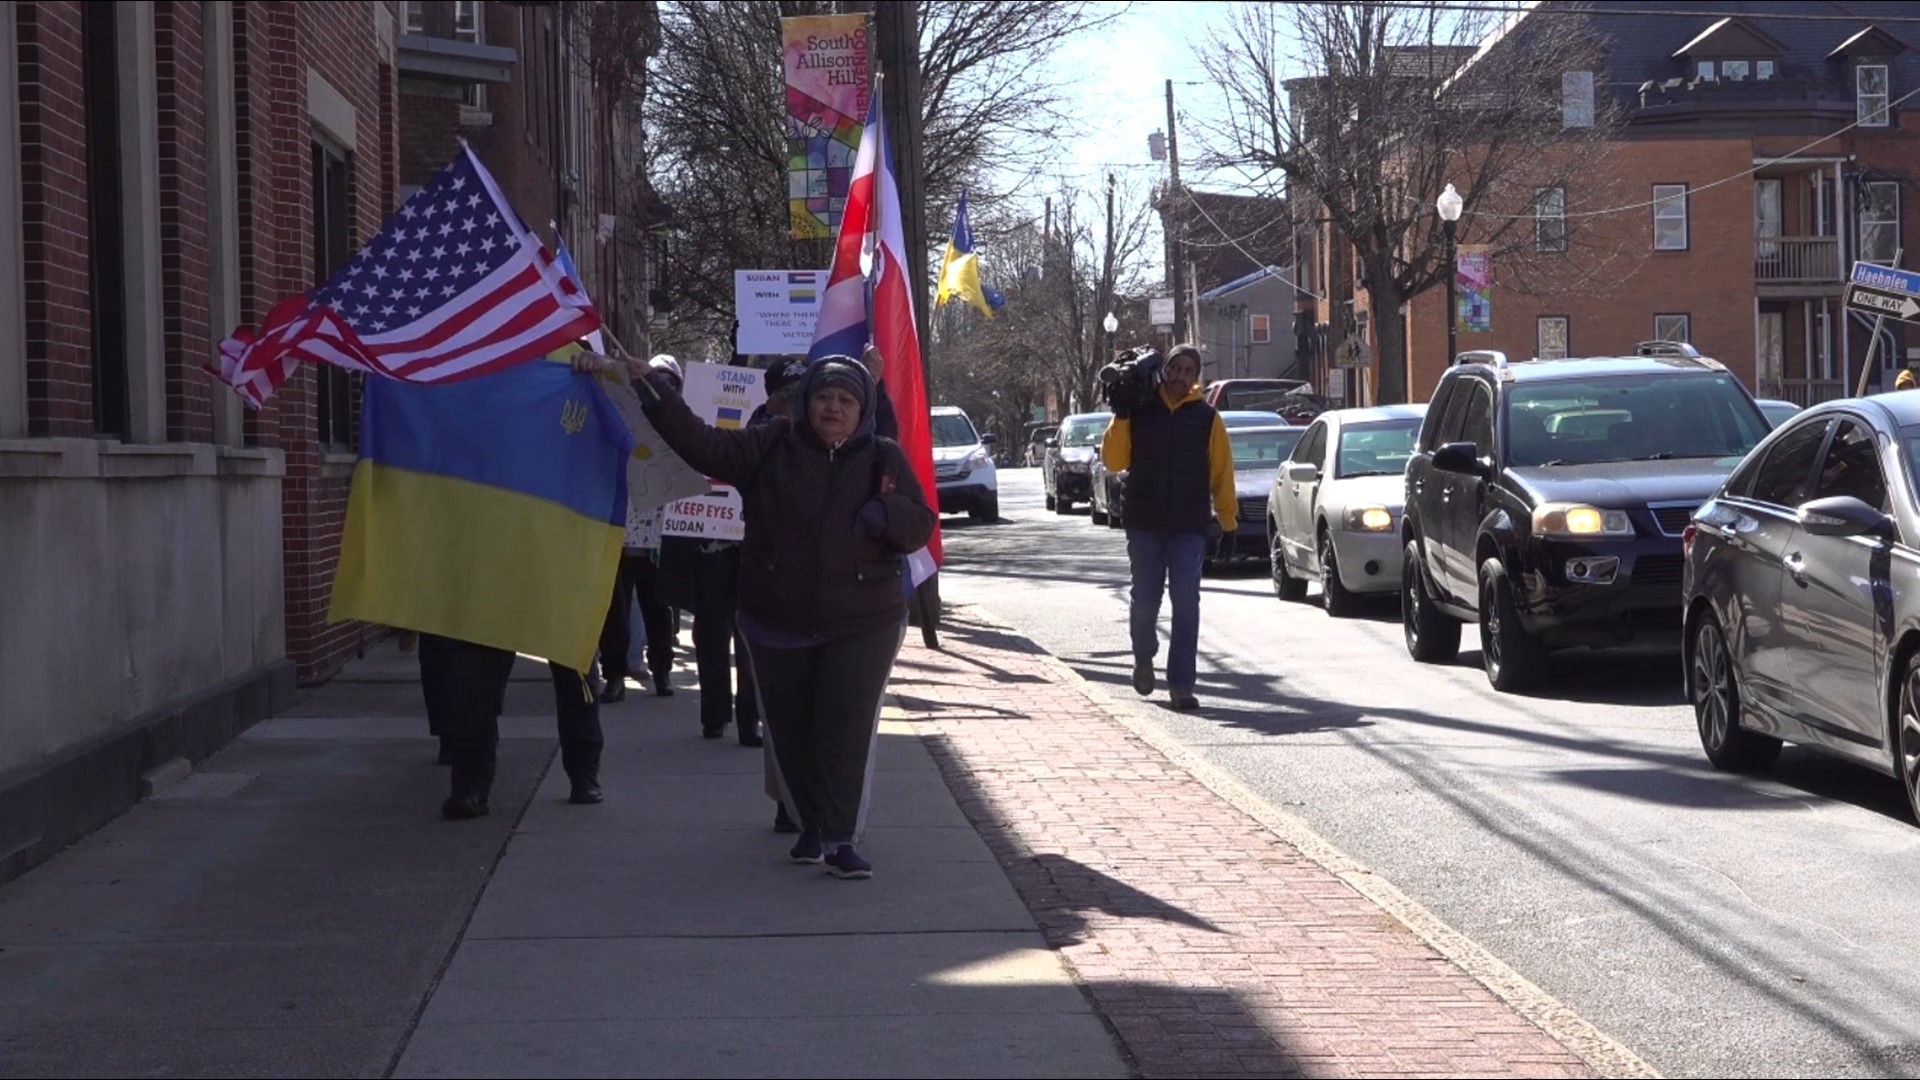 The ralliers waved many different flags as they marched down Derry Street but carried a single message: the world stands behind Ukraine.